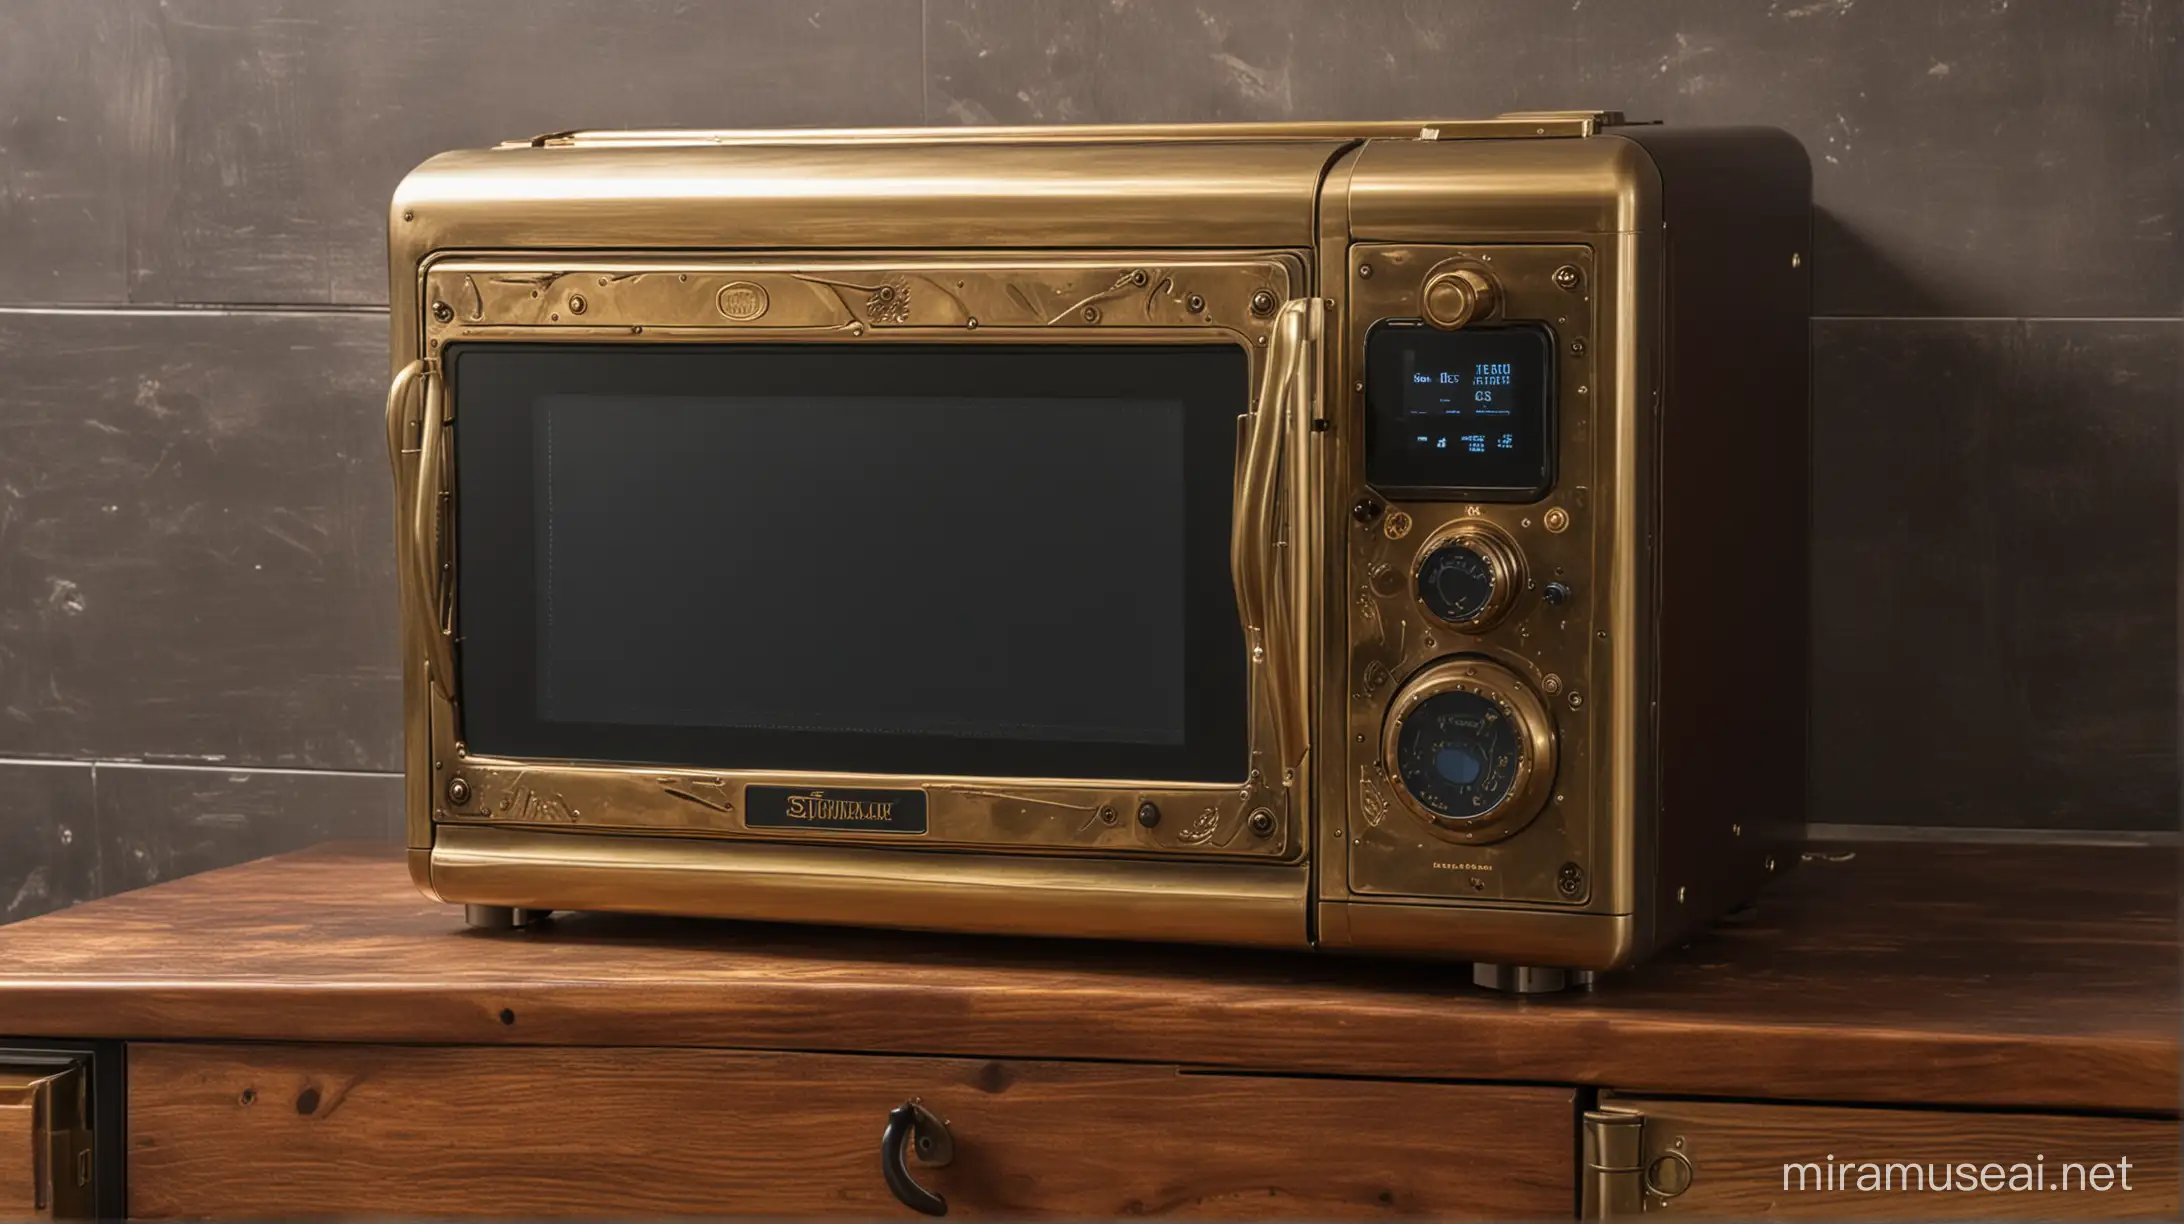 steampunk microwave oven on a cupboard in a steampunk kitchen, the oven made of brass and glass